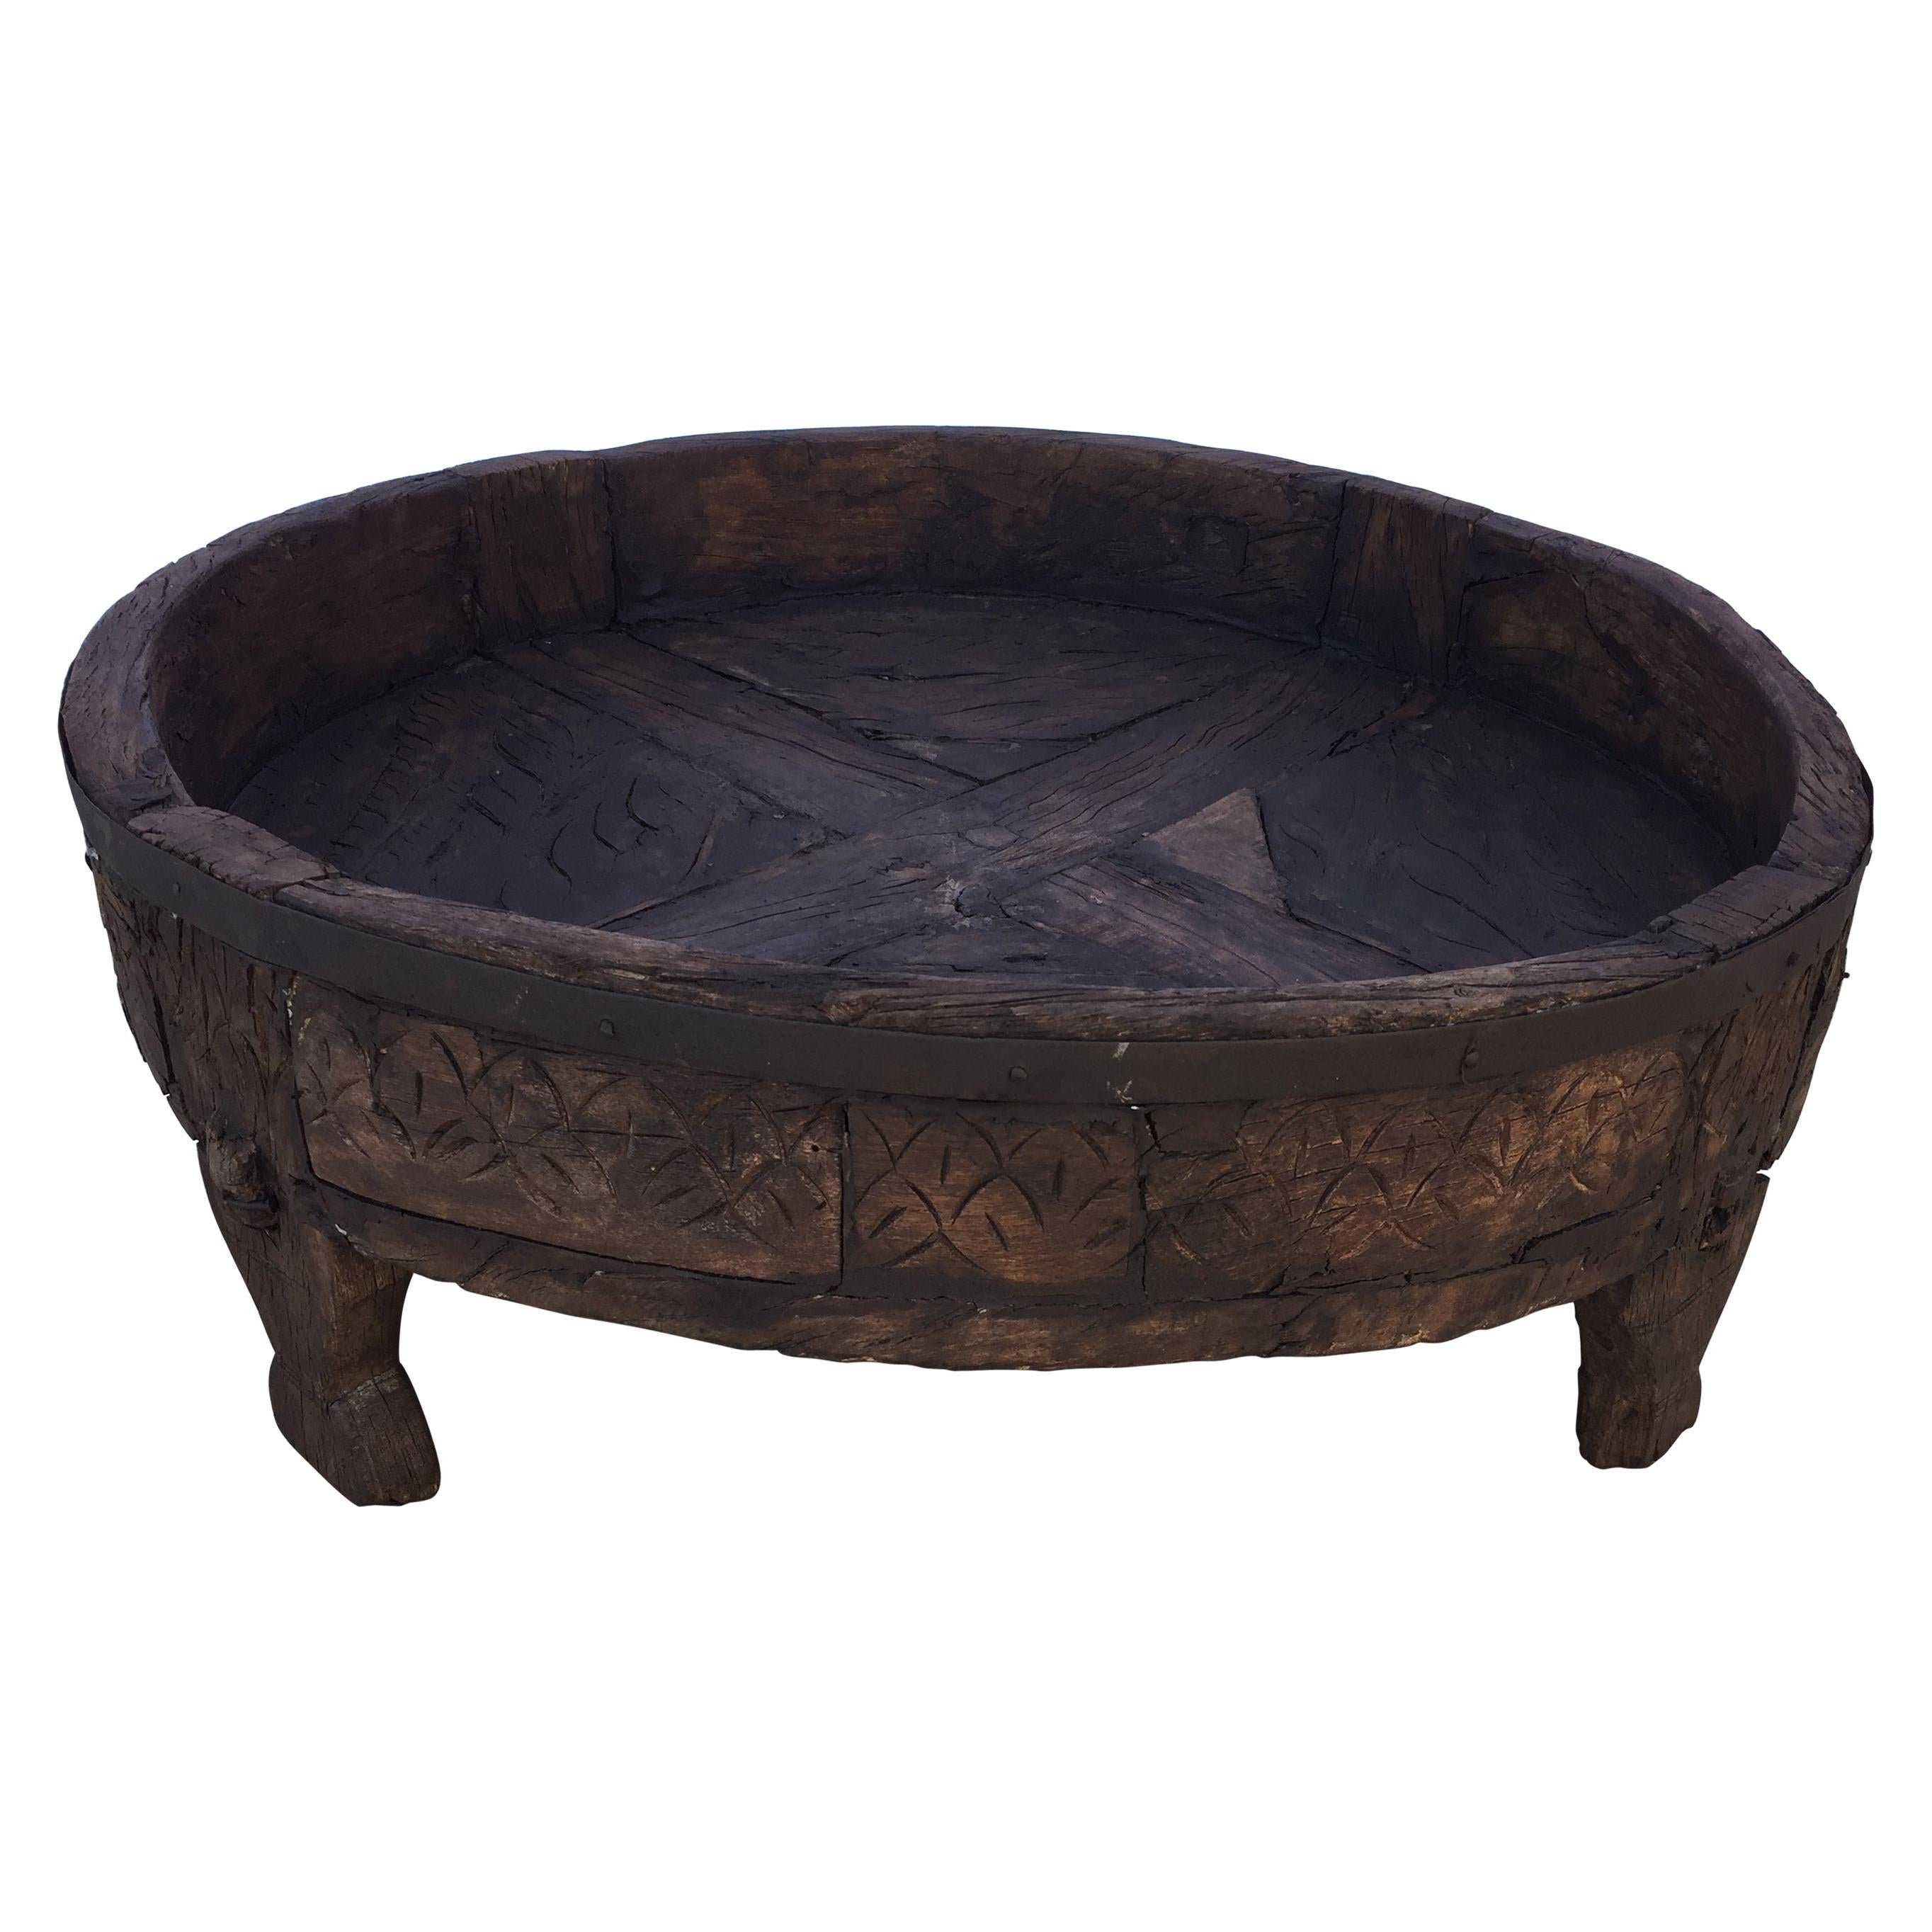 Large Round Tribal Low Grinder Table from India